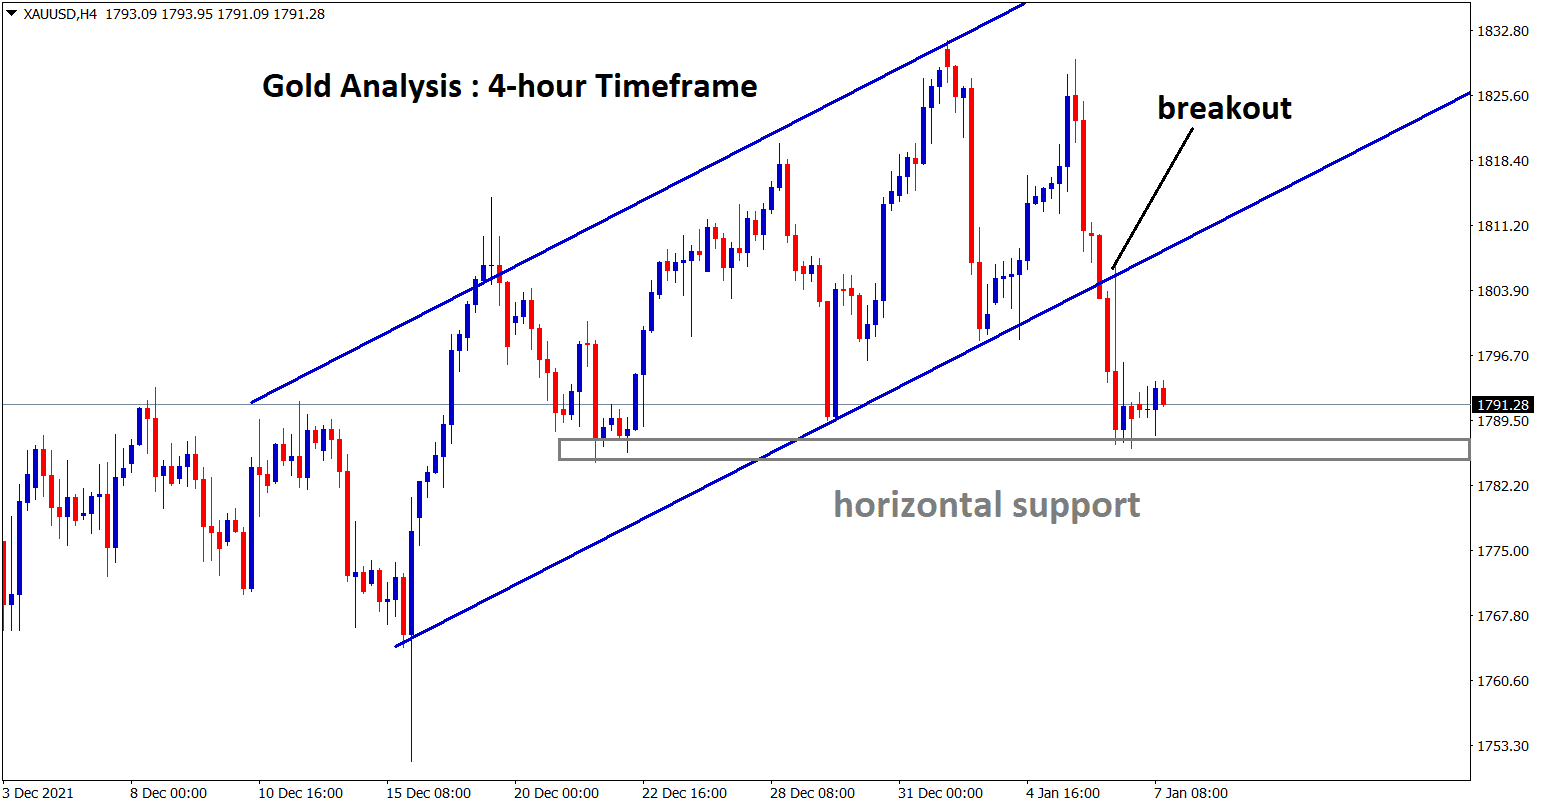 Gold has broken the low level of the ascending channel